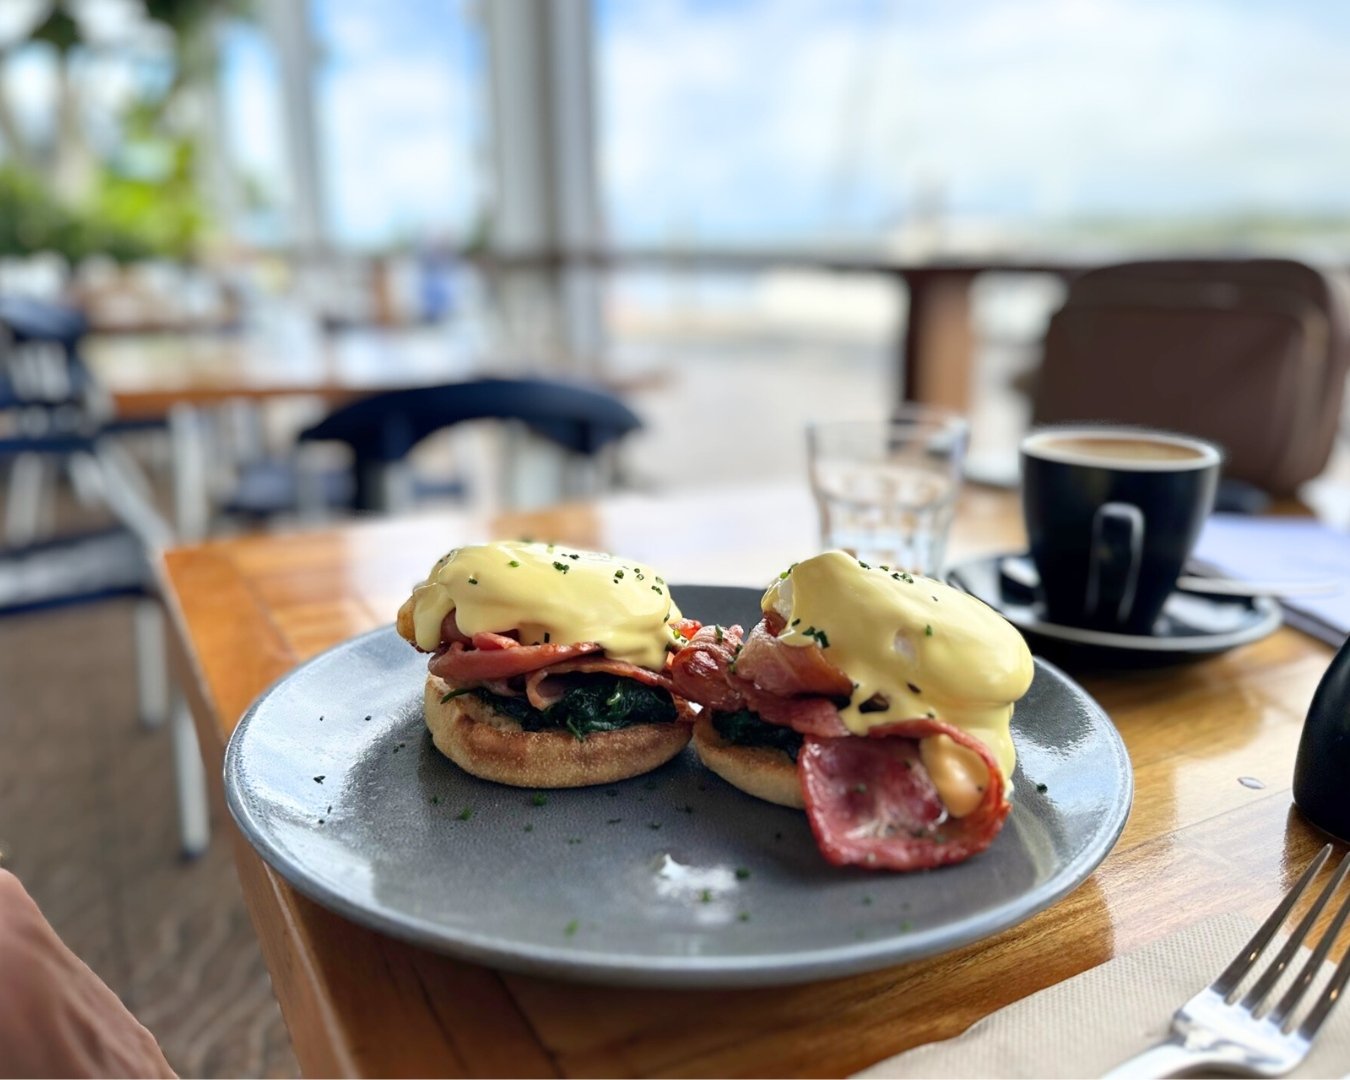 There's nothing better than a great breakfast down by the river. 

We open at 7.30am from Thursdays through to Mondays (closed Tuesday &amp; Wednesday) 

#wharfbarballina #ballinansw #breakfastballina #ballinasbestbreakfast